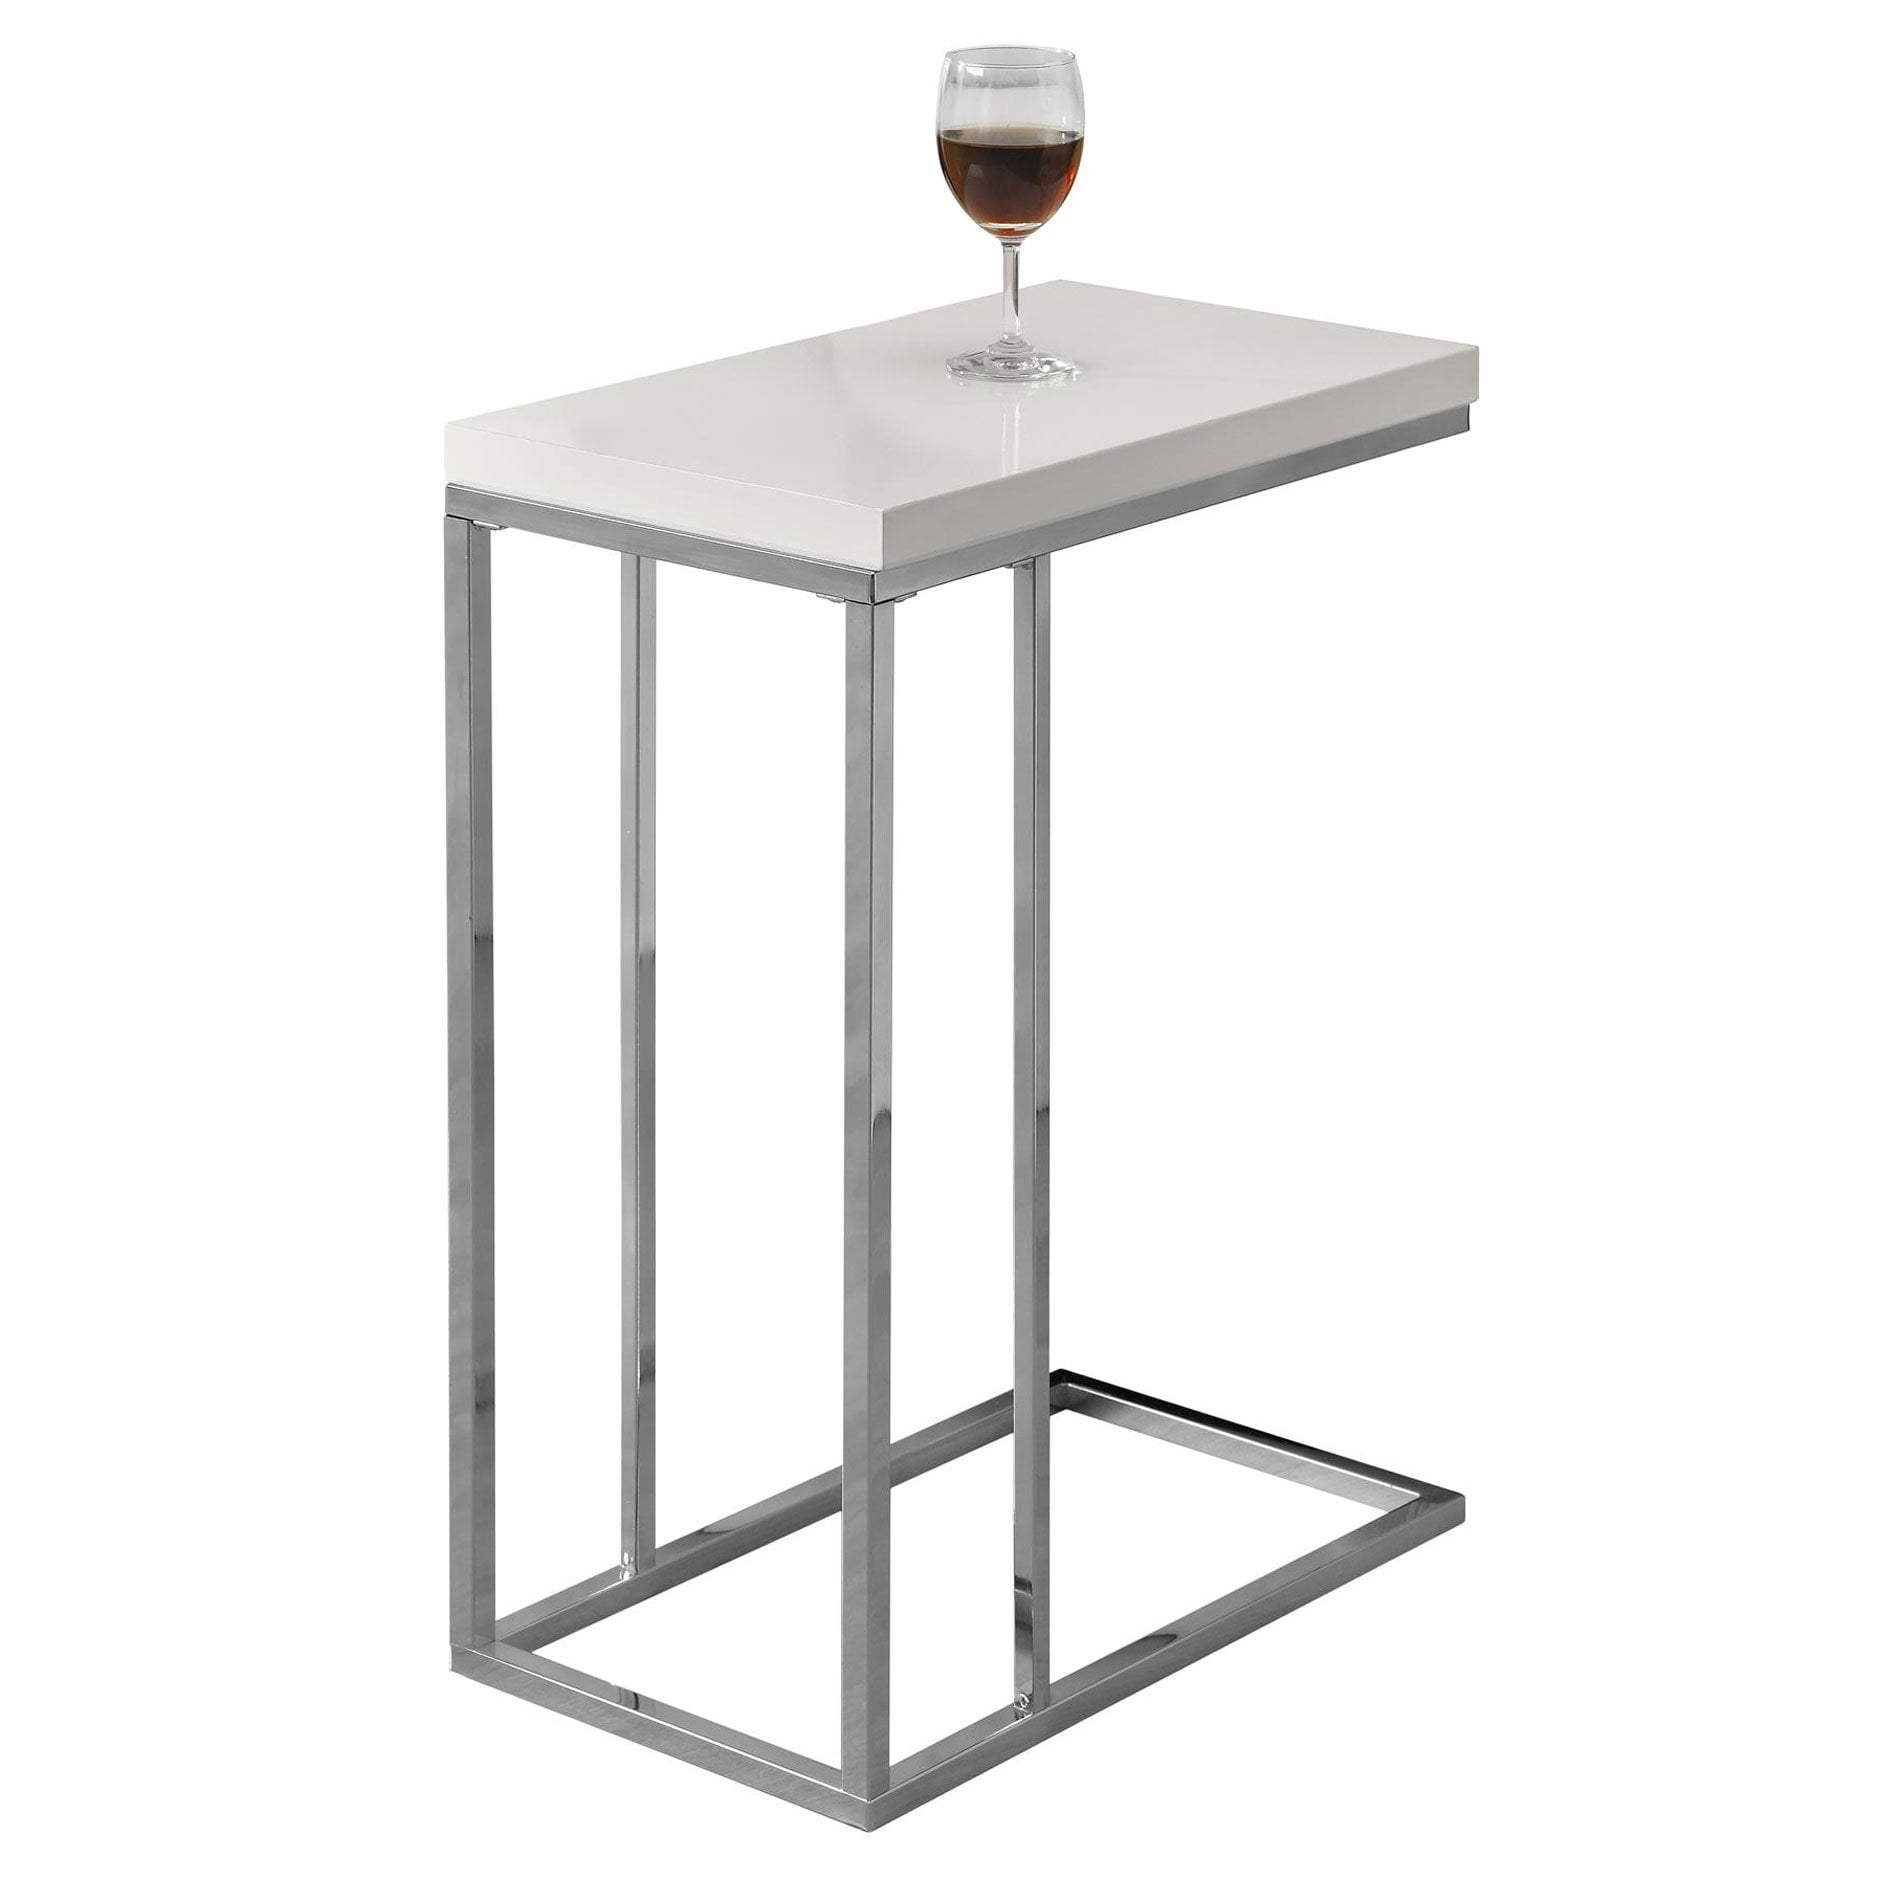 Monarch Specialities Accent Table I-3215 Glossy White With Tempered Glass